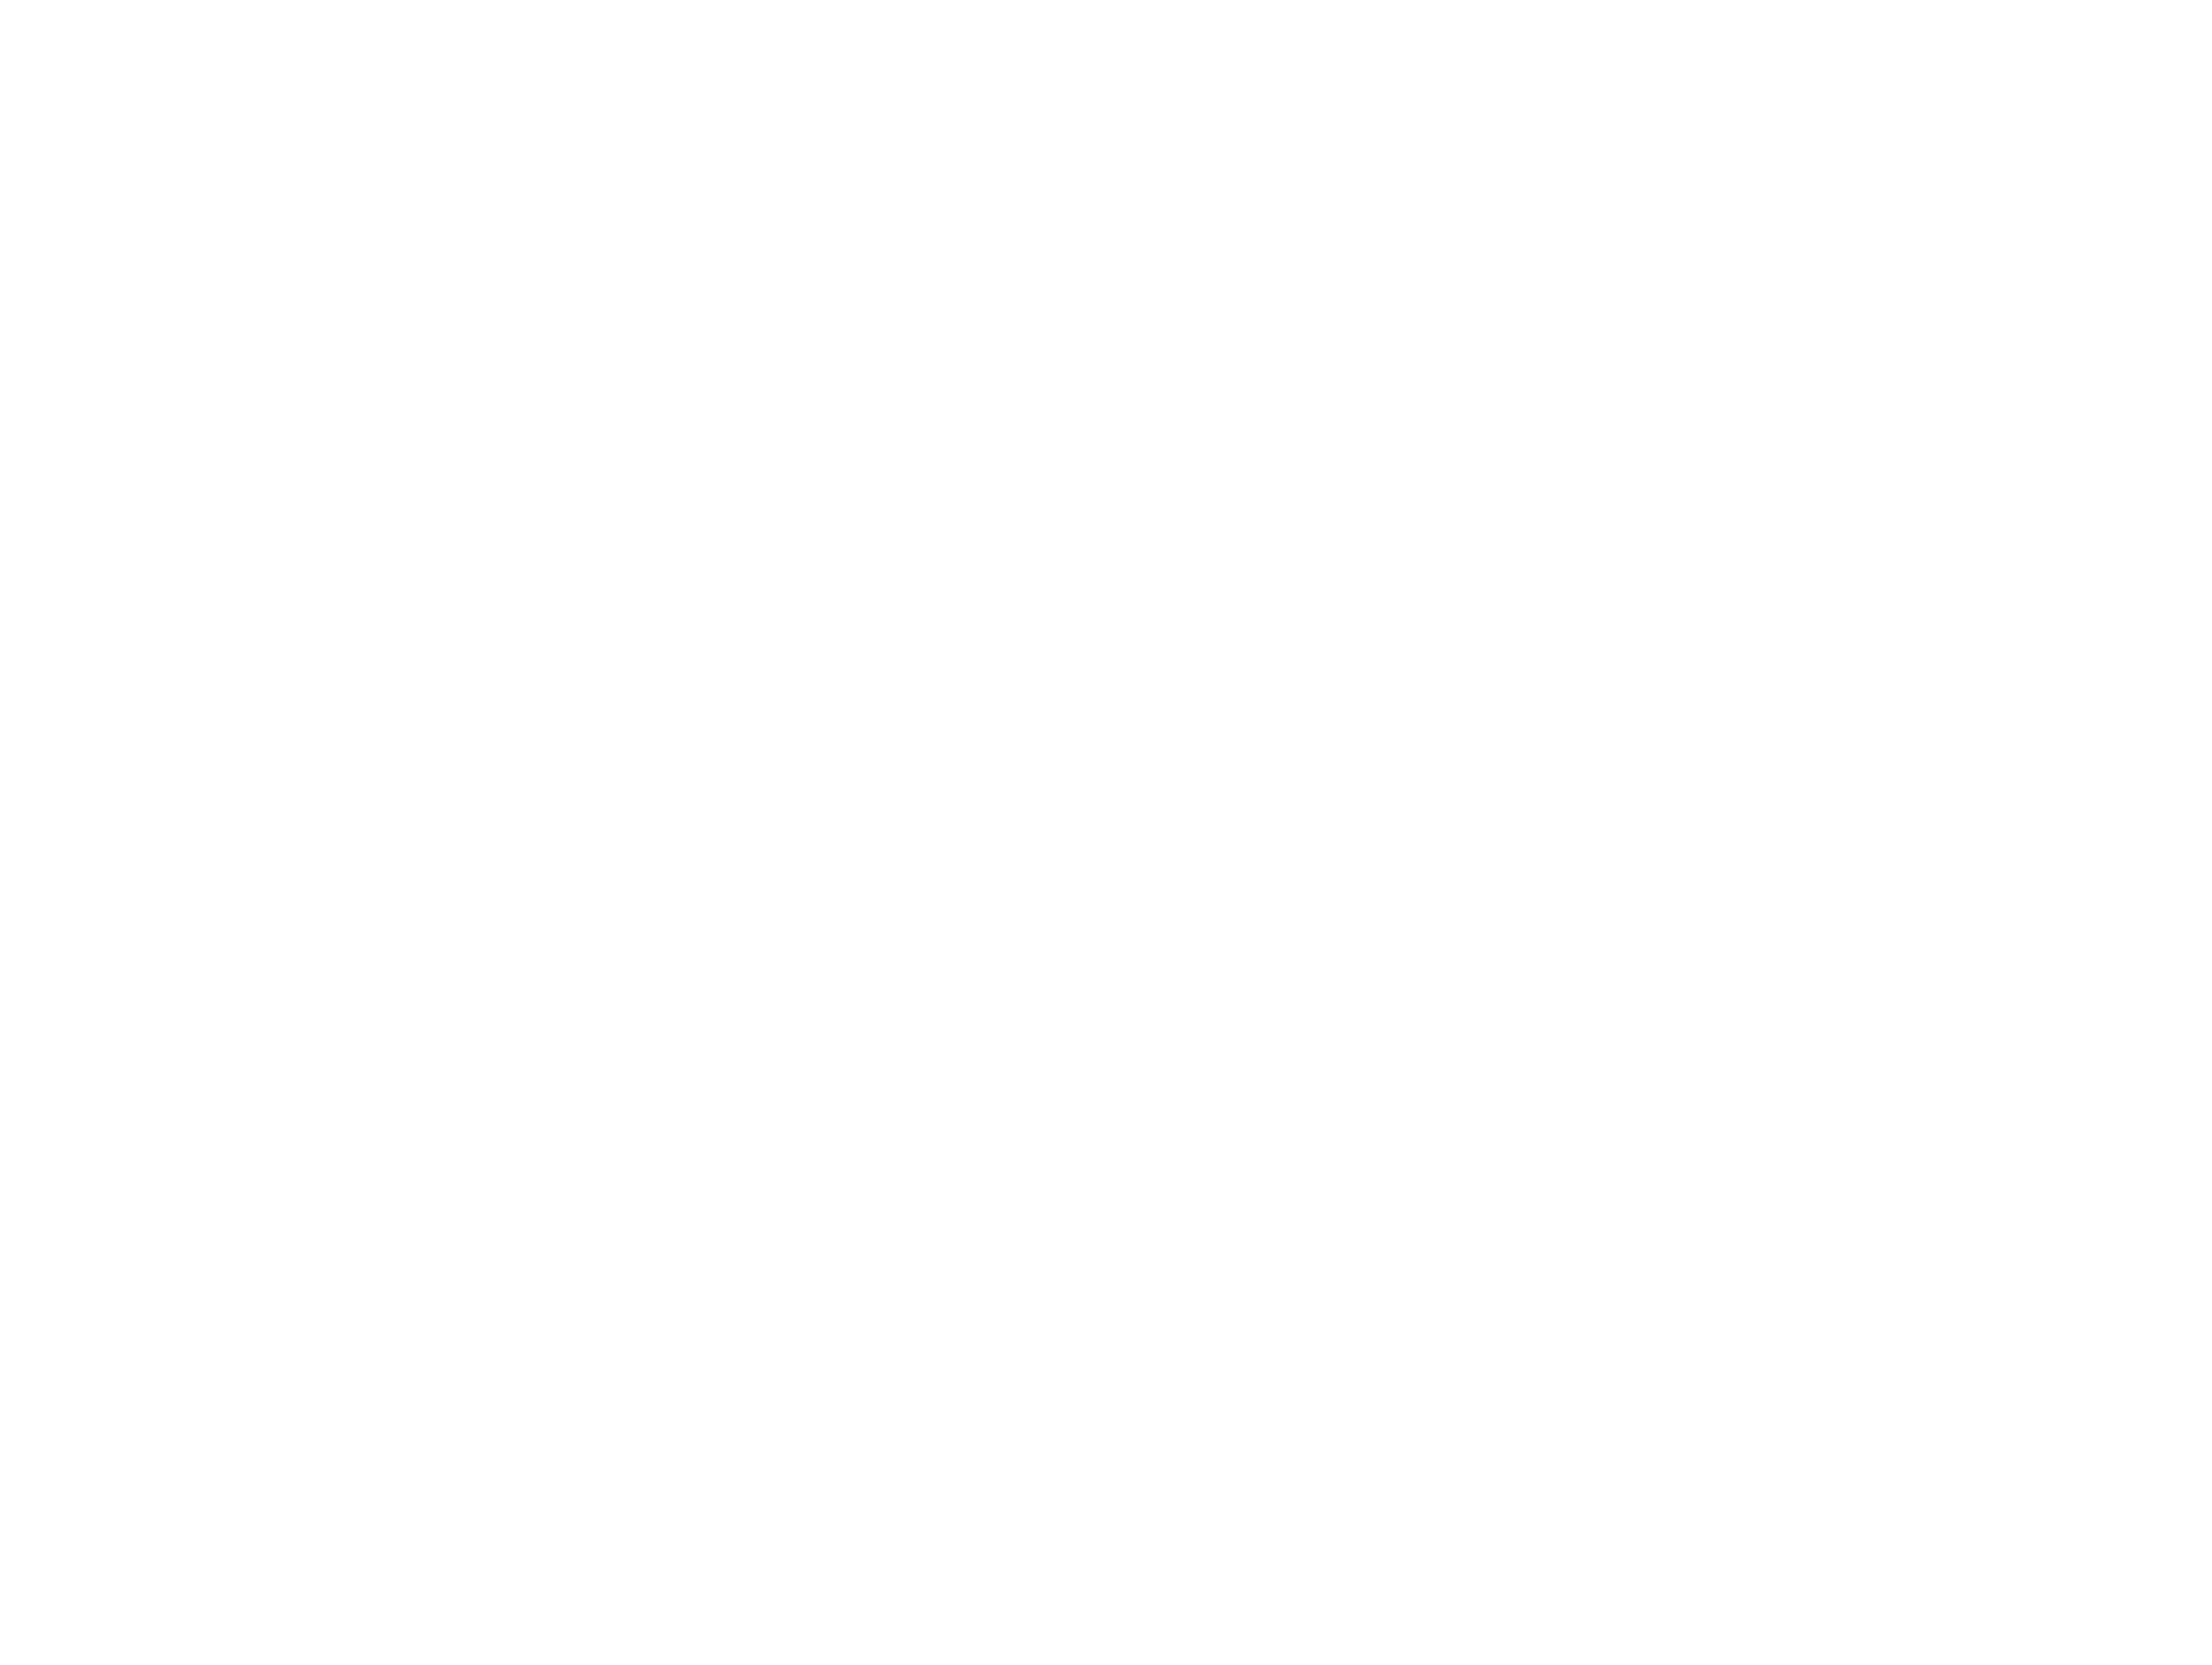 NM Productions